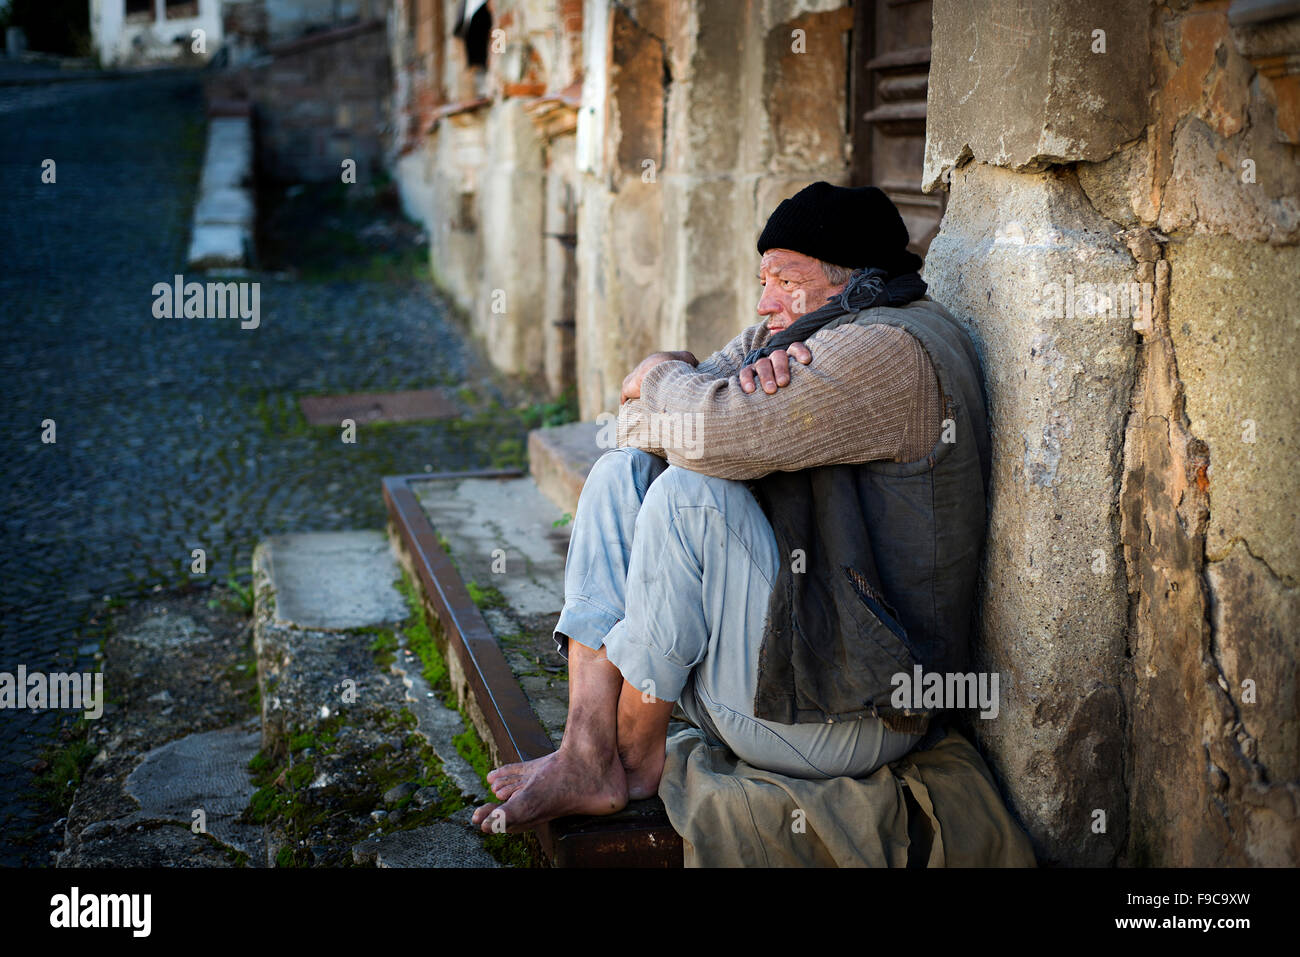 homeless man in the street Stock Photo